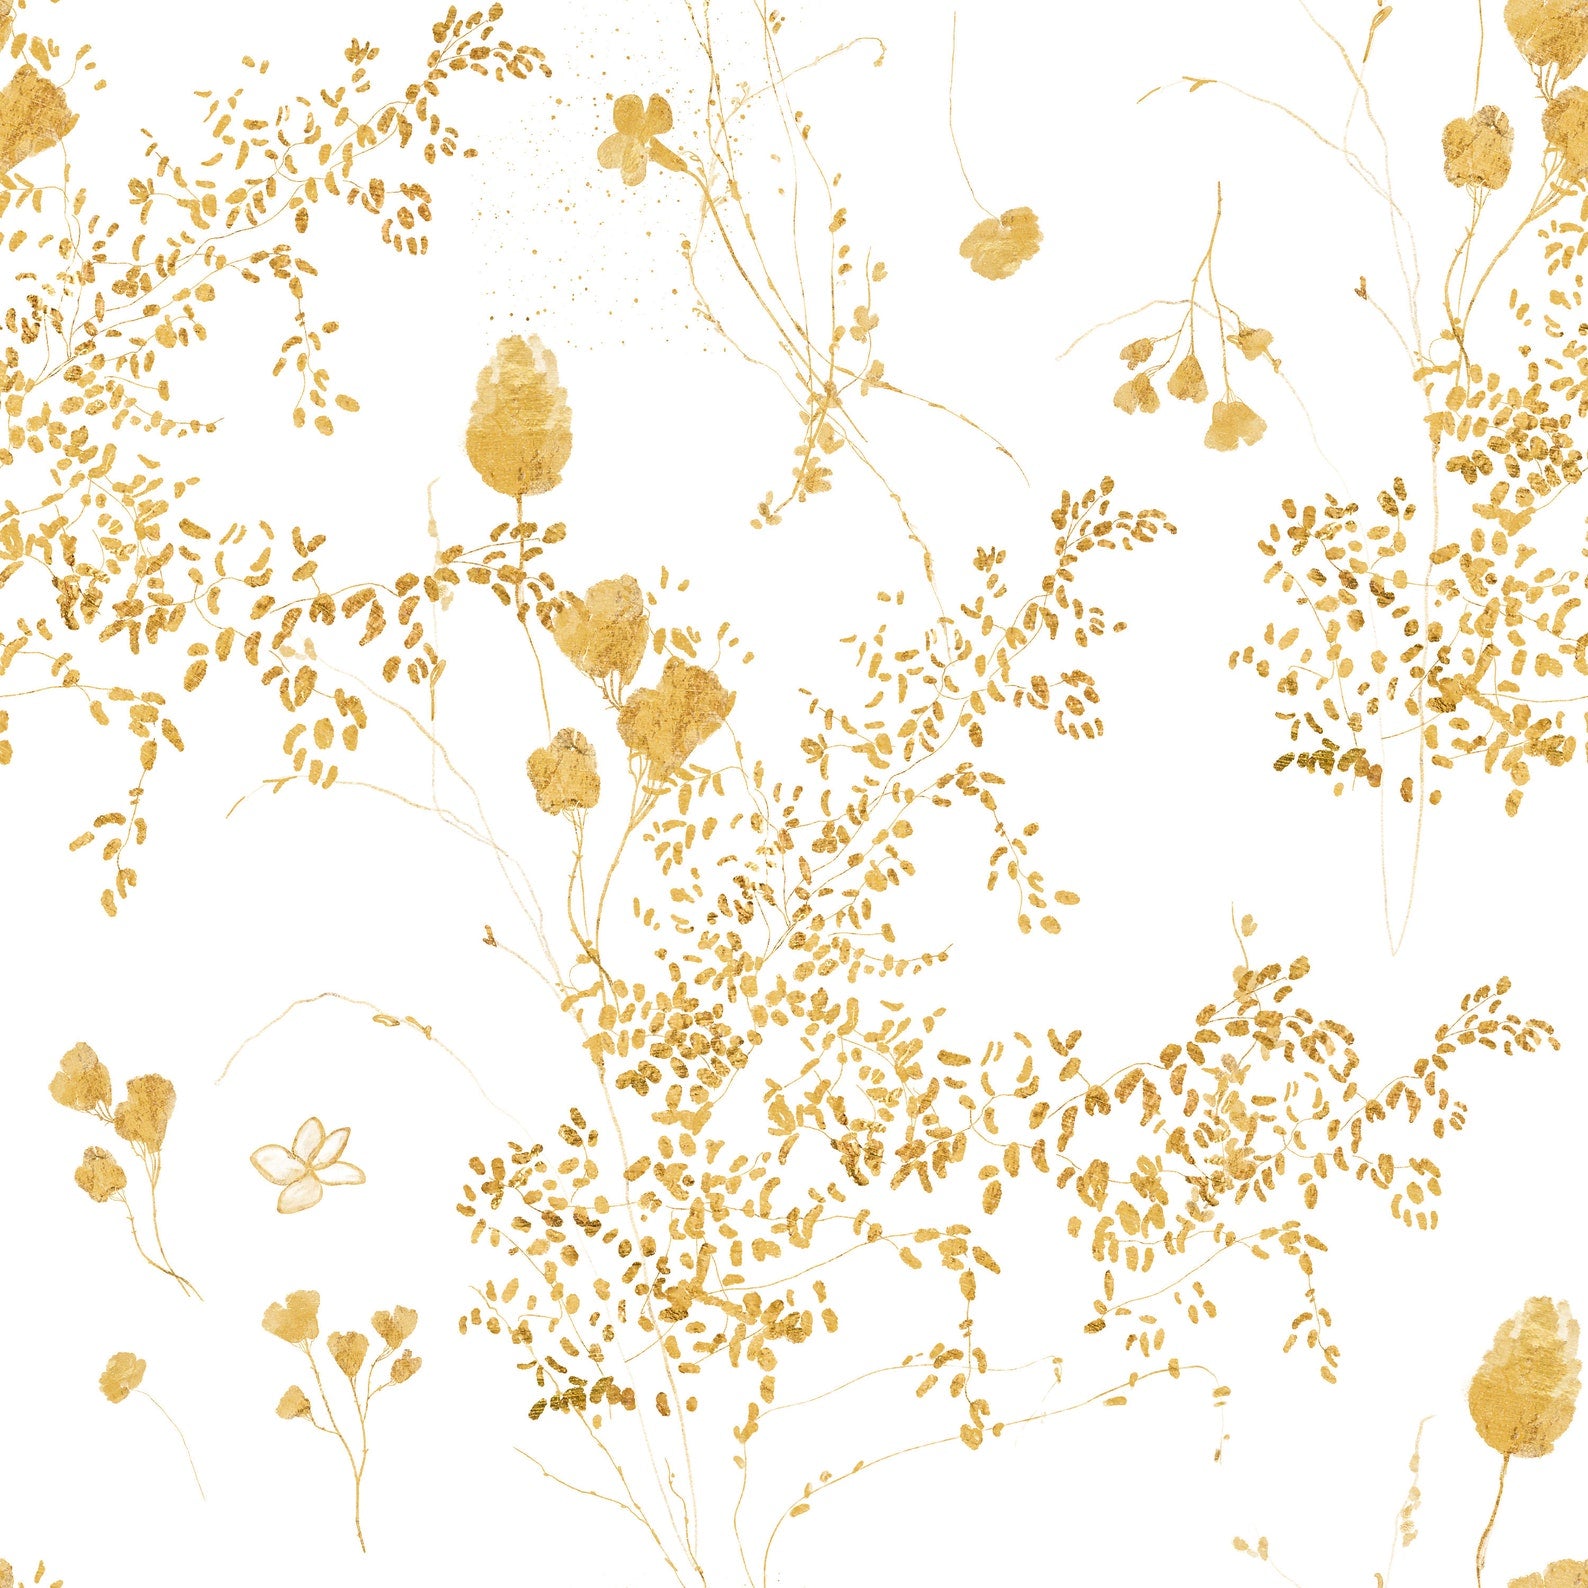 A wallpaper pattern with whimsical golden floral bunches scattered across a clean white background, evoking a sense of natural elegance.